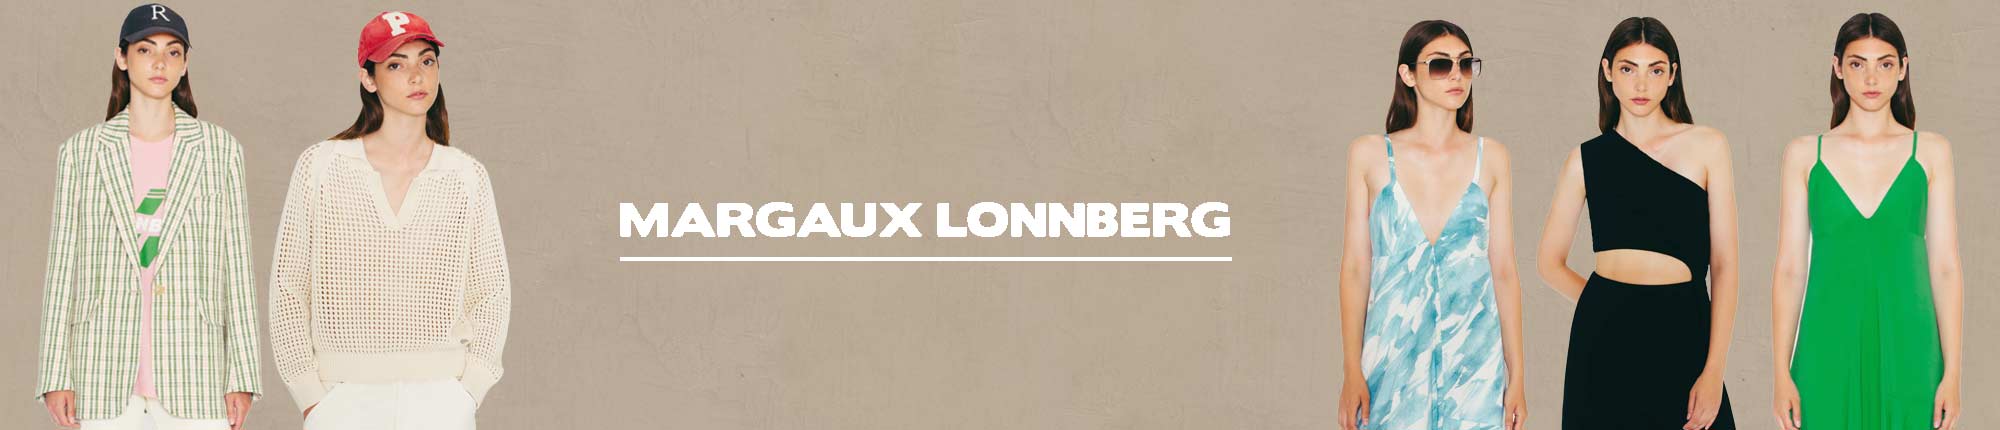 Margaux Lonnberg | Collection